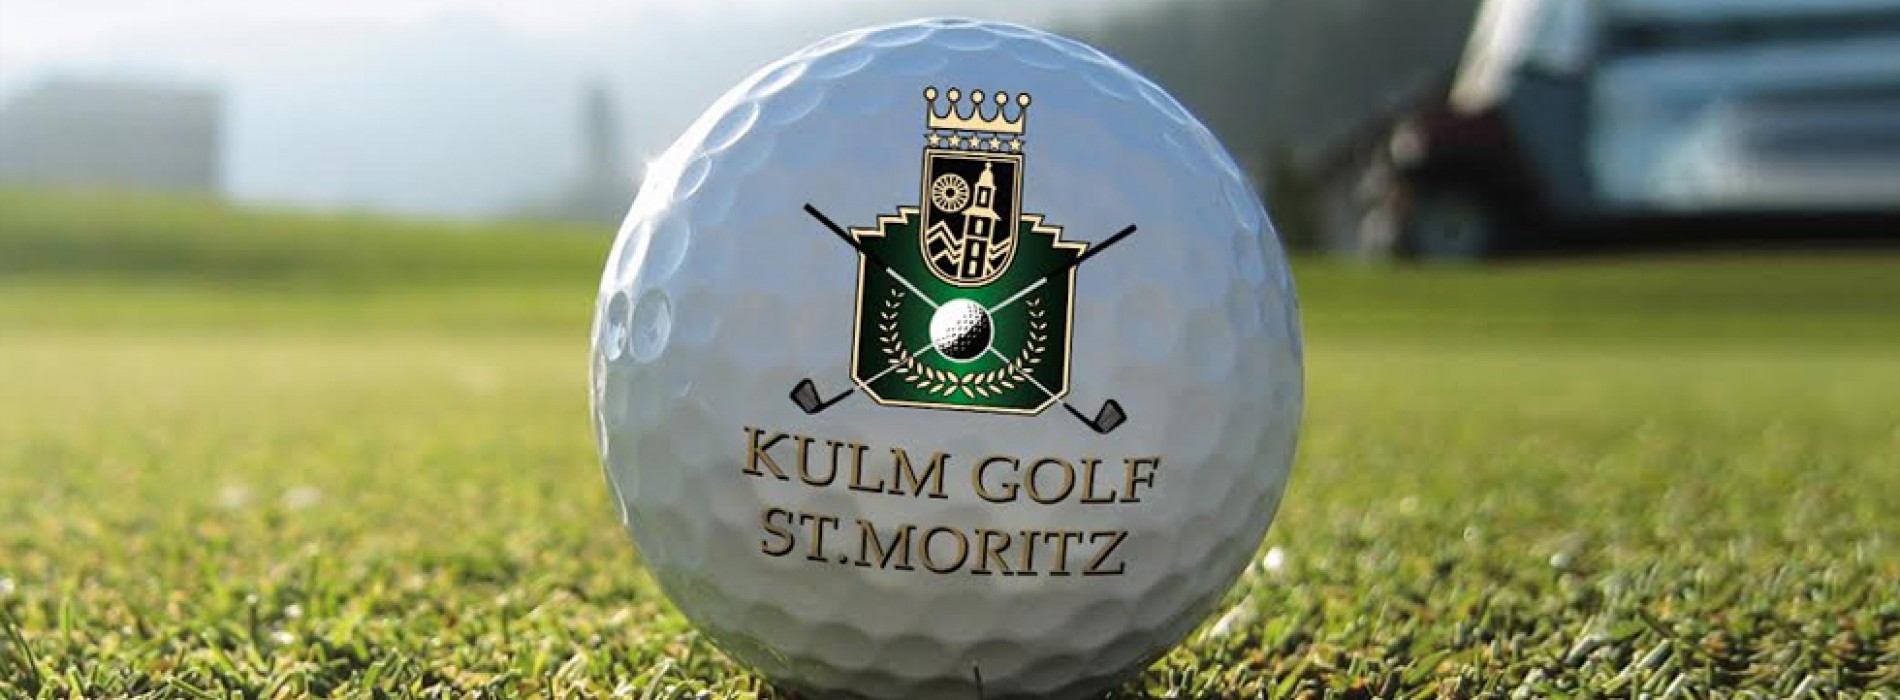 St. Moritz and The Engadin – A paradise for golfers